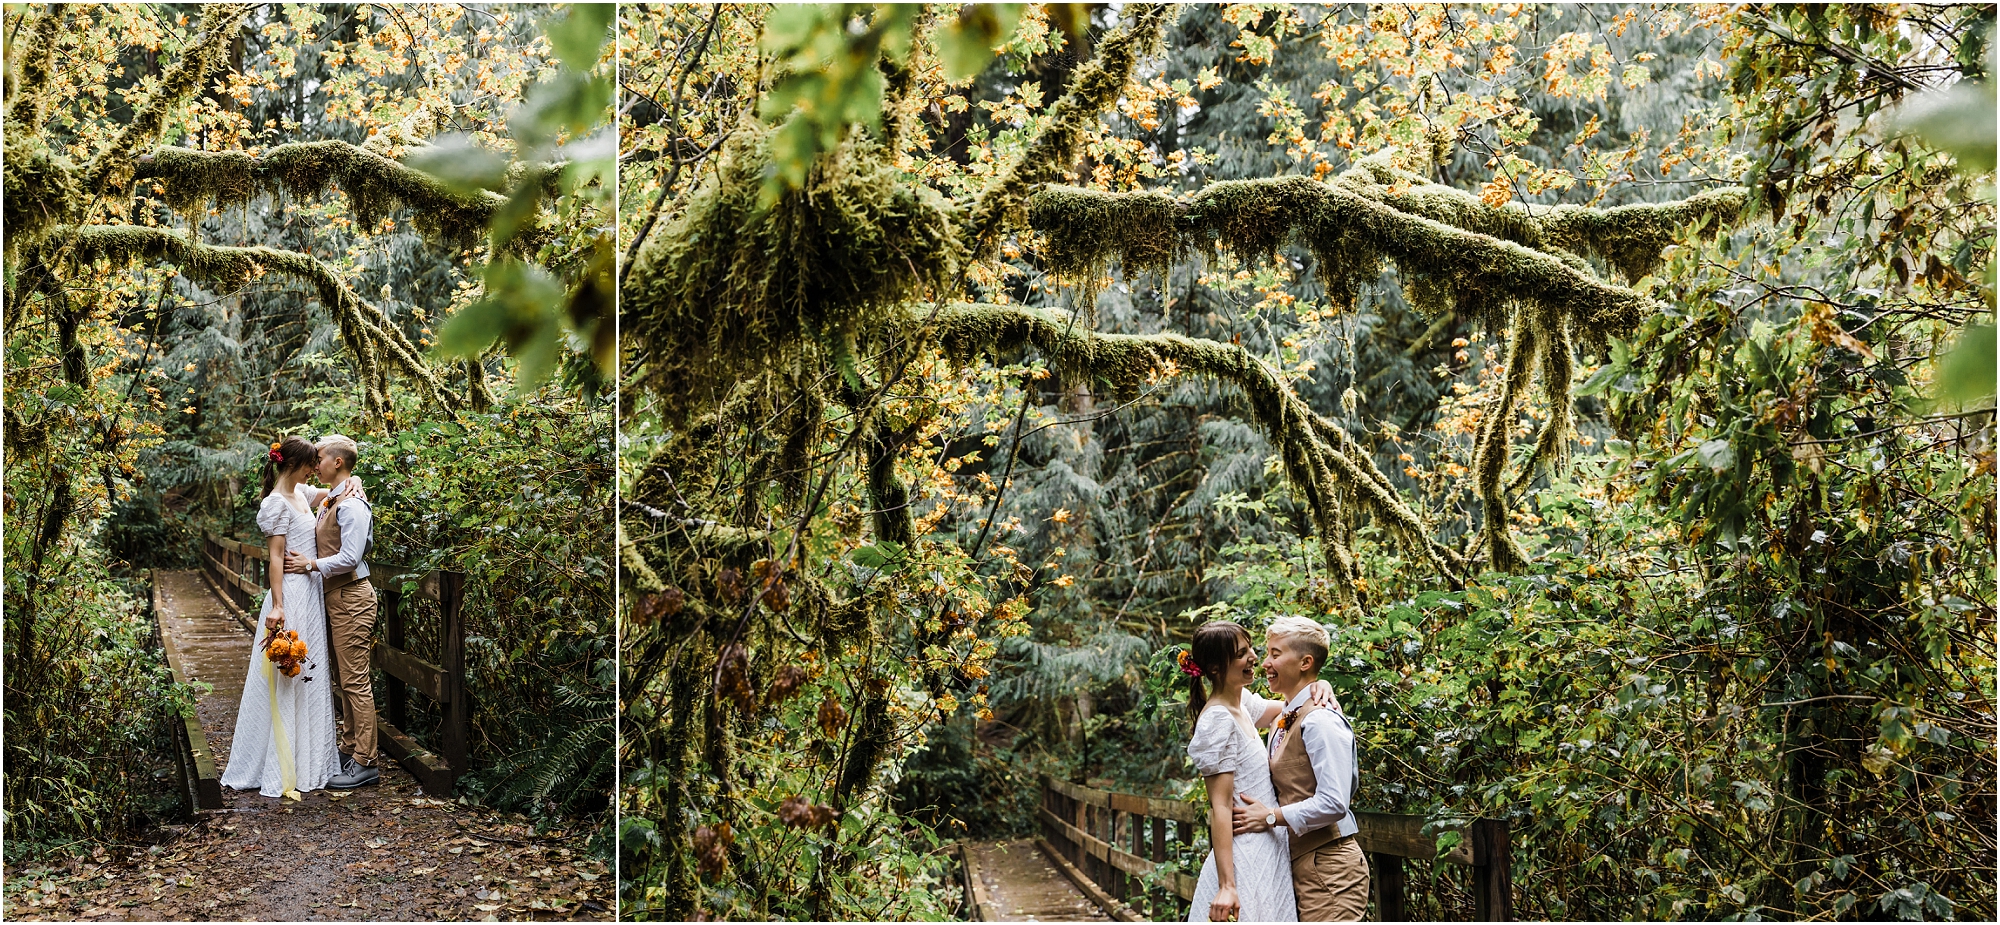 Moss lines low hanging tree branches as this couple wearing white and tan embrace in a kiss before their PNW hiking adventure elopement on the Drift Creek Falls trail in Oregon. | Erica Swantek Photography